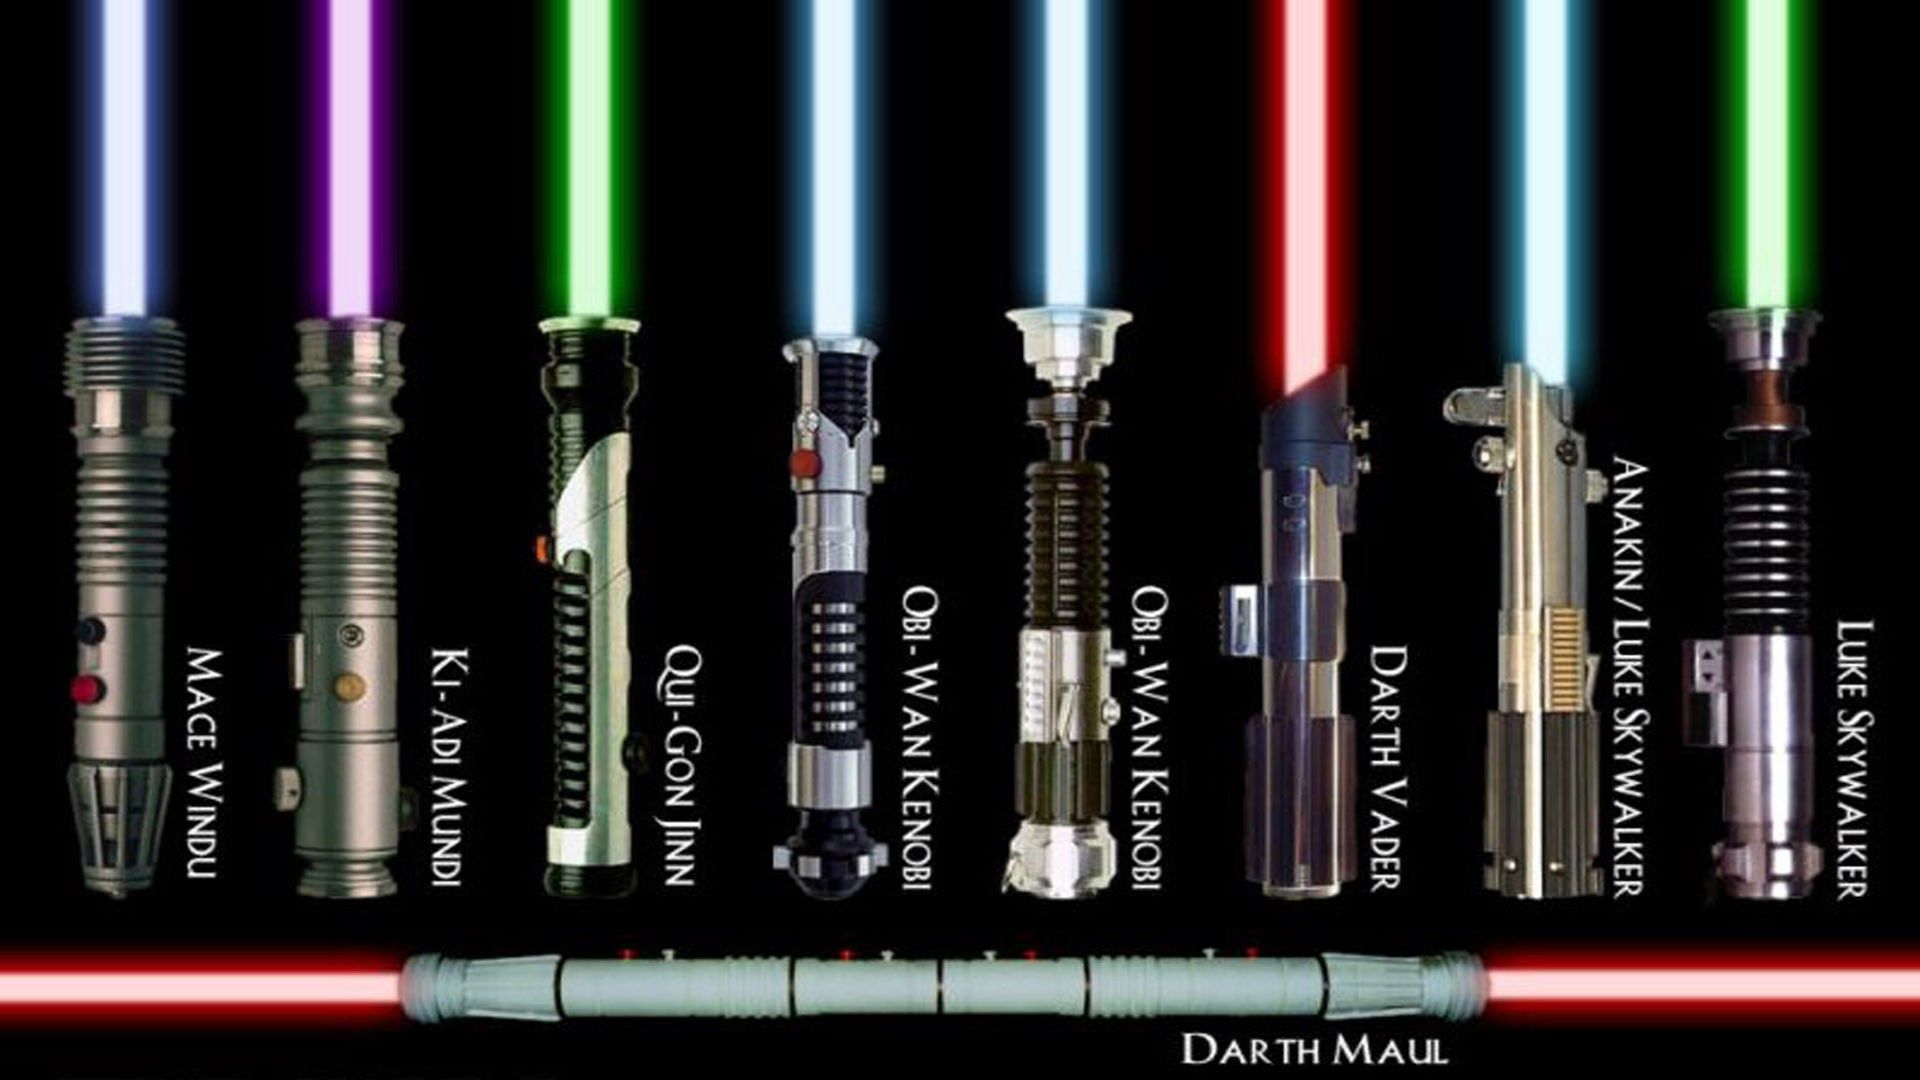 Lightsaber wallpapers hd free download